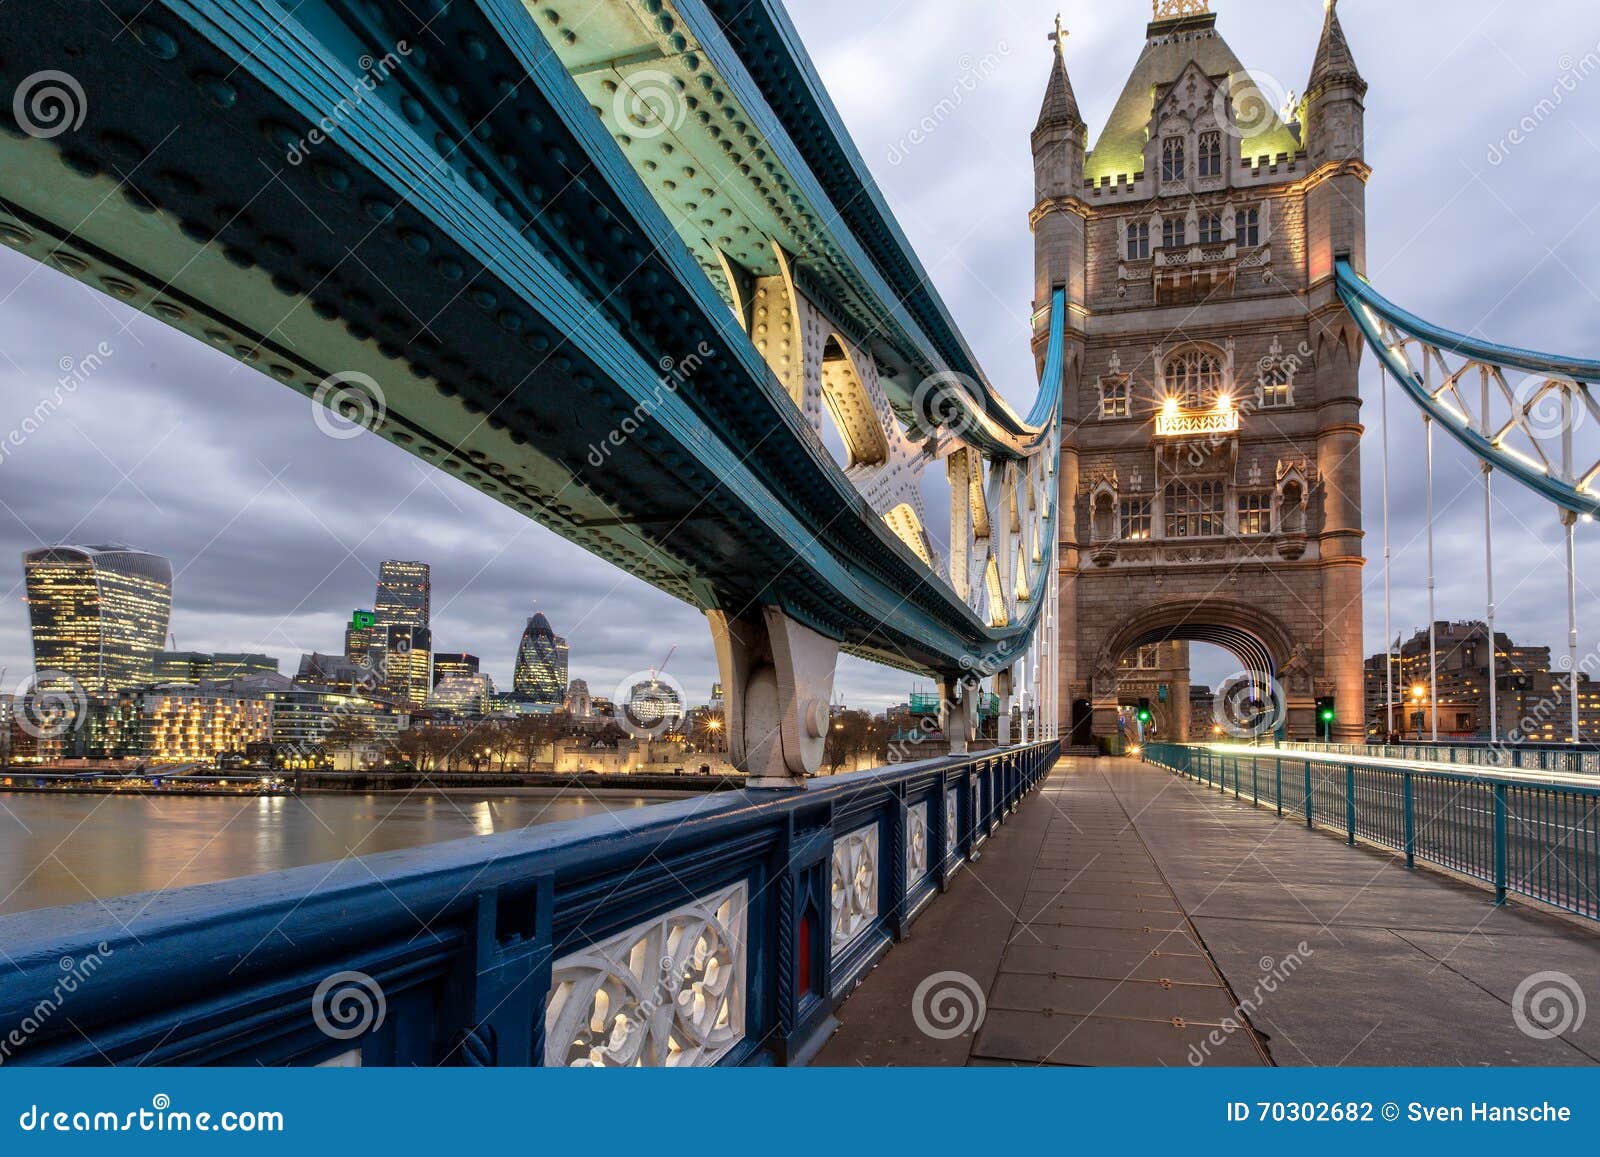 Tower Bridge London With City Of London In The Background Stock